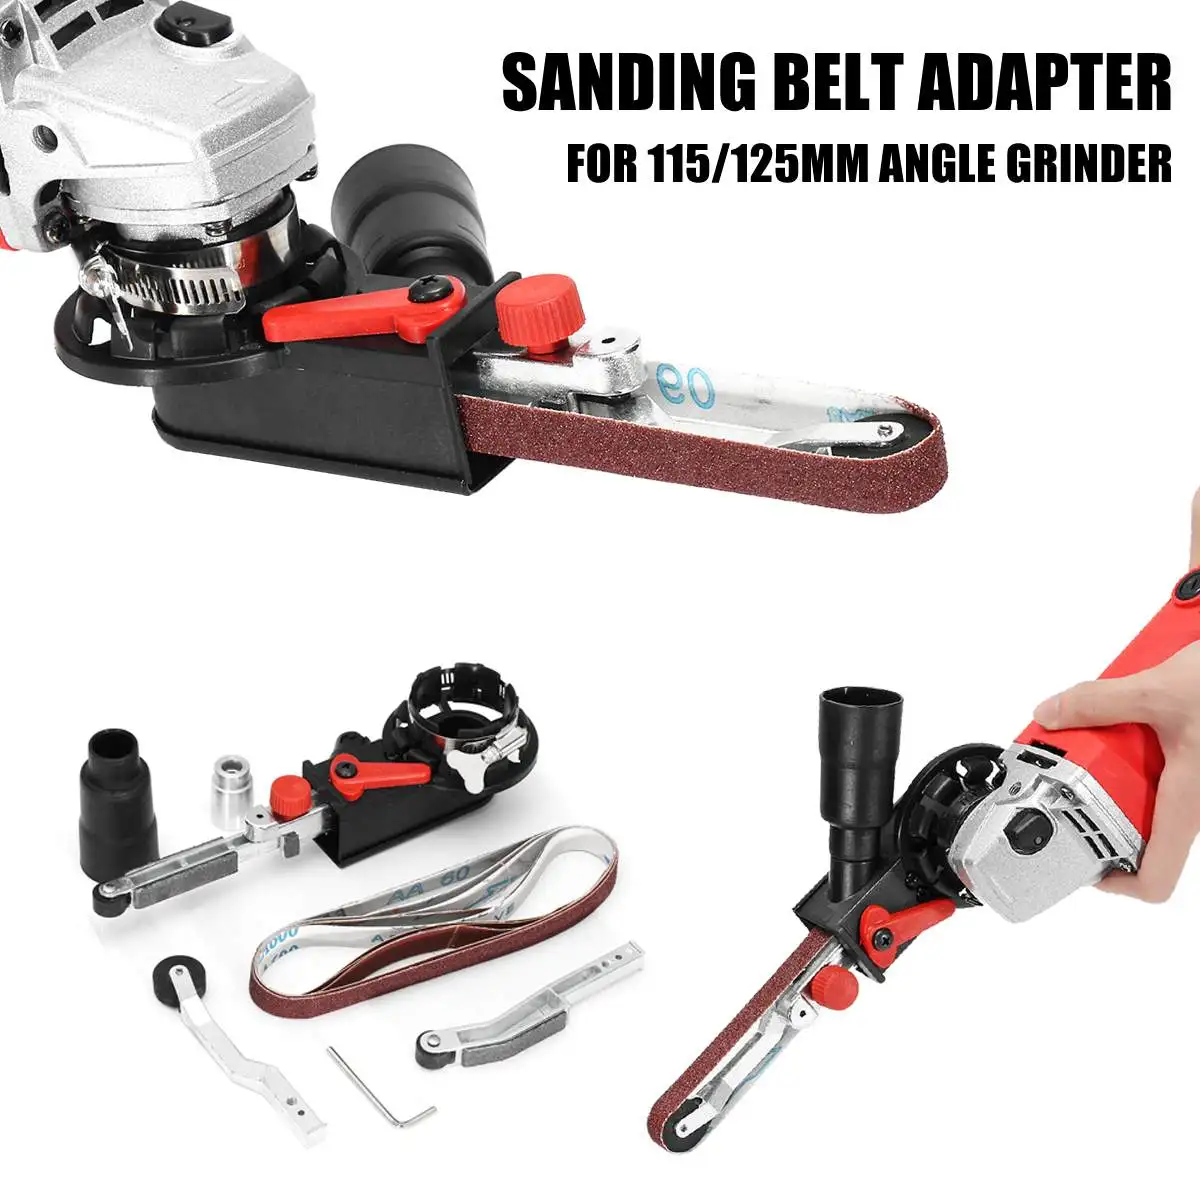 

M10/M14 Sanding Belt Adapter Attachment Converting 100/115/125mm Electric Angle Grinder To Belt Sander WoodWorking